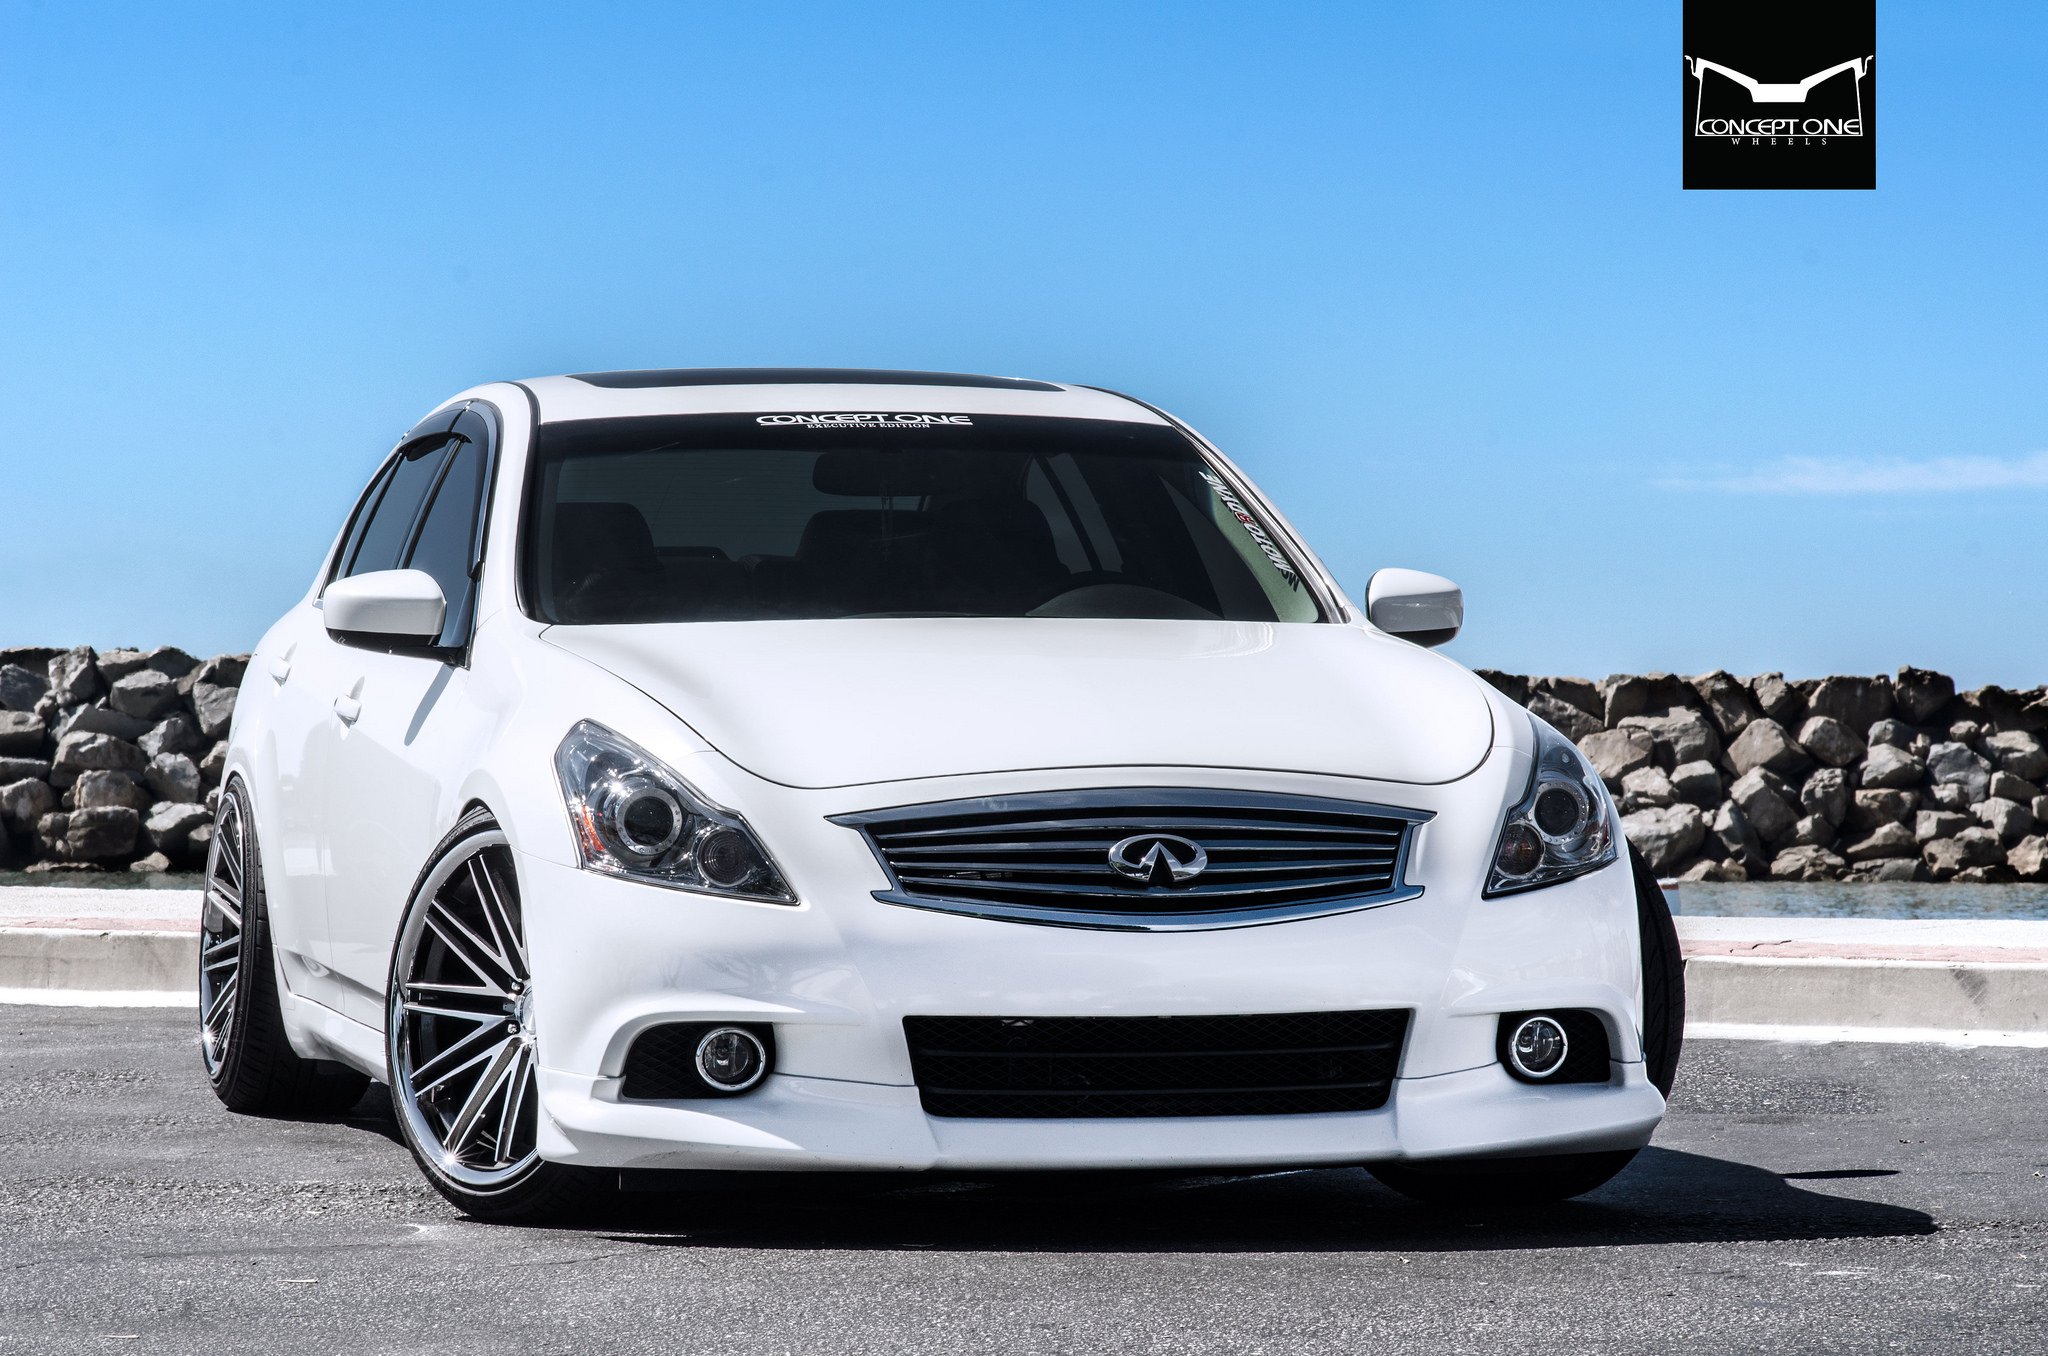 Chrome Billet Grille on White Infiniti G37 - Photo by Concept One